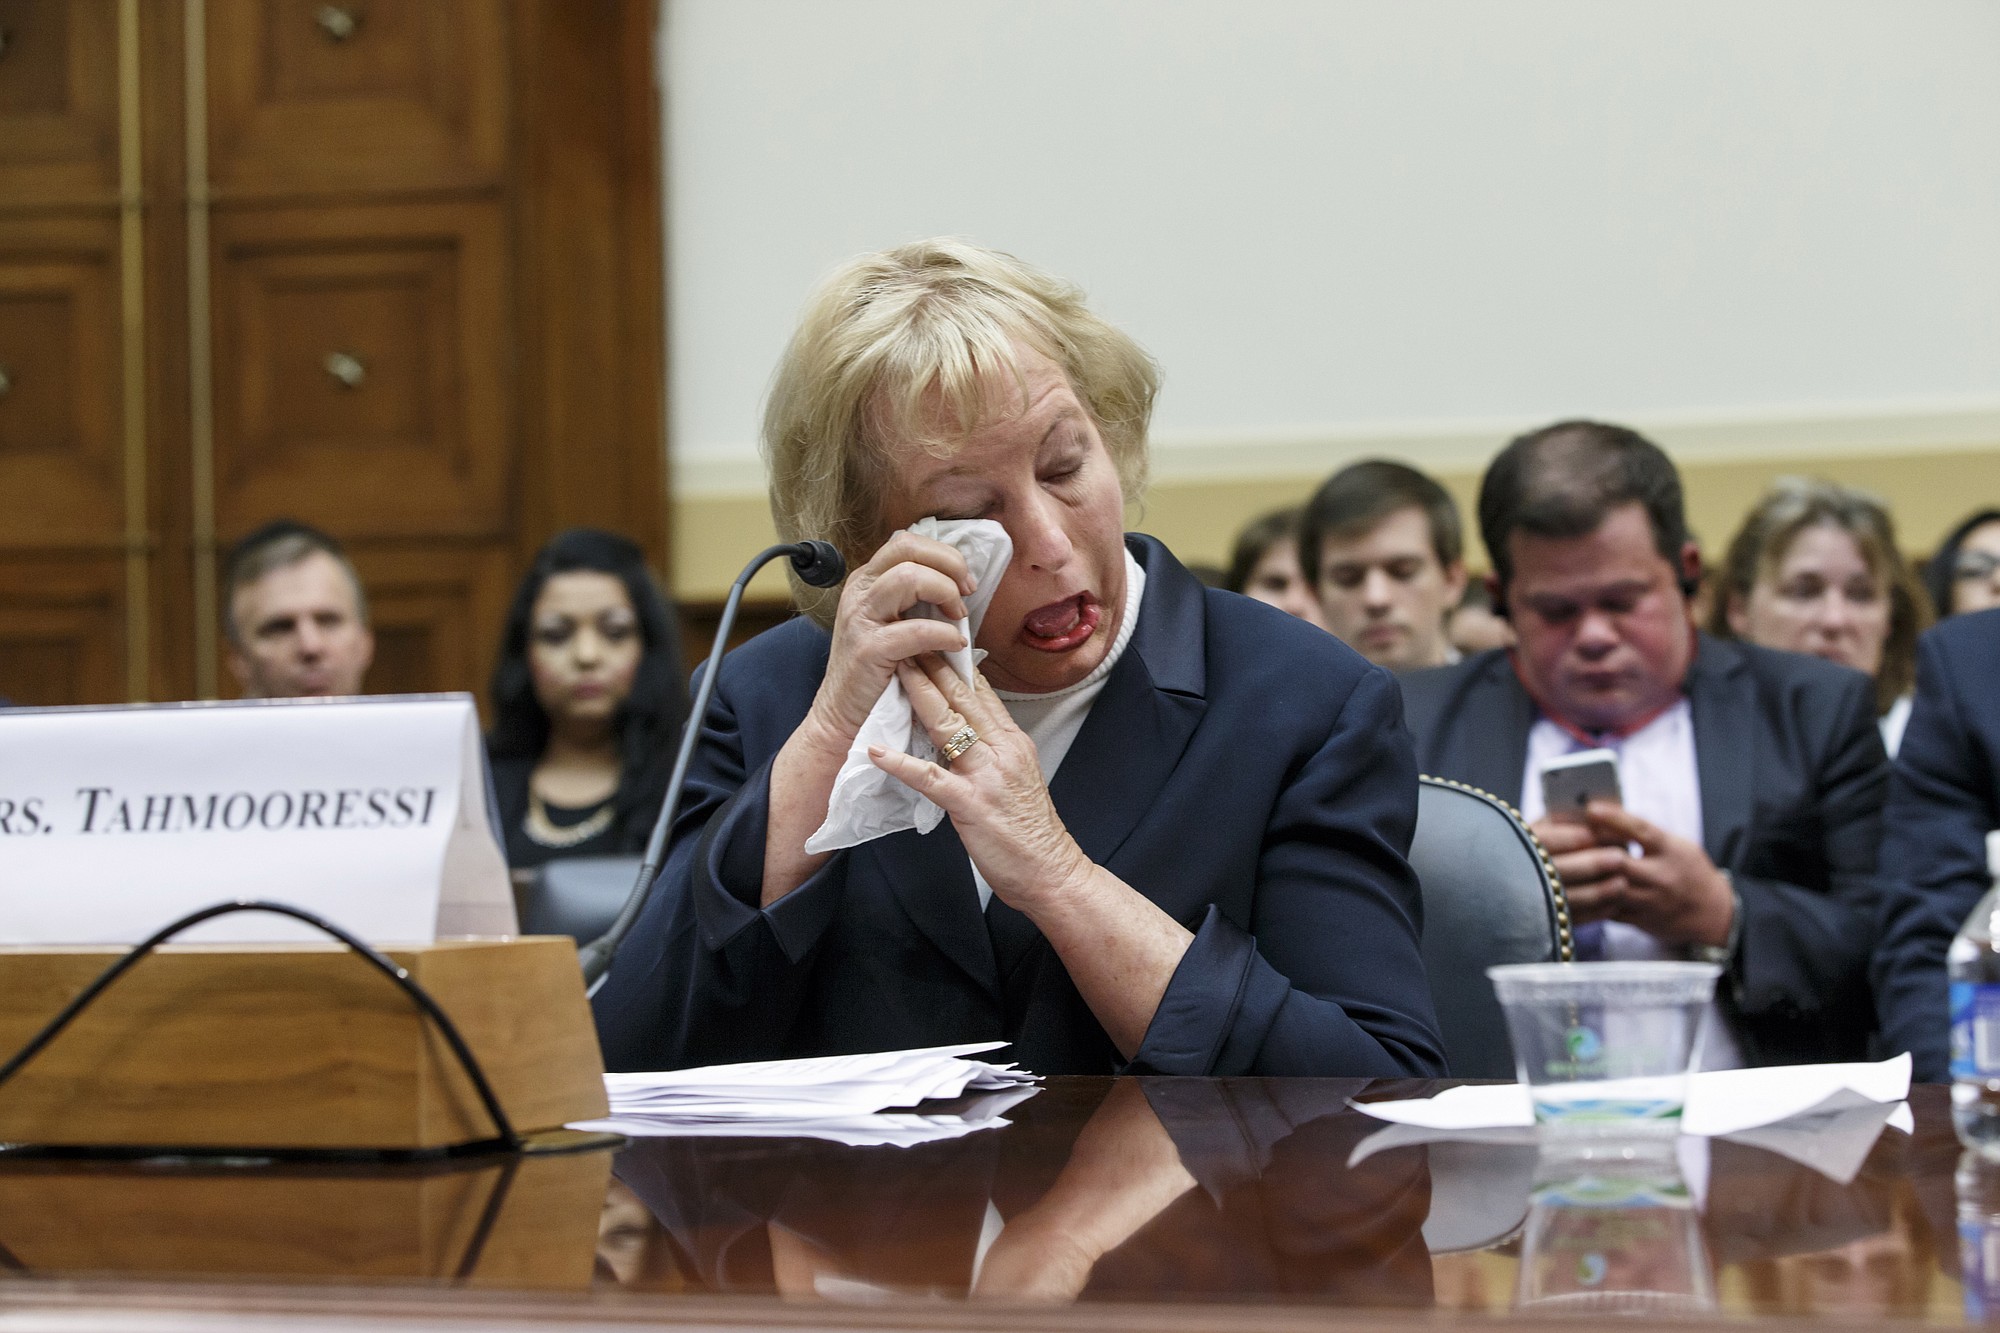 Jill Tahmooressi, mother of Marine Sgt. Andrew Tahmooressi, weeps after reading his letters from confinement during a House Foreign Affairs subcommittee hearing Oct.